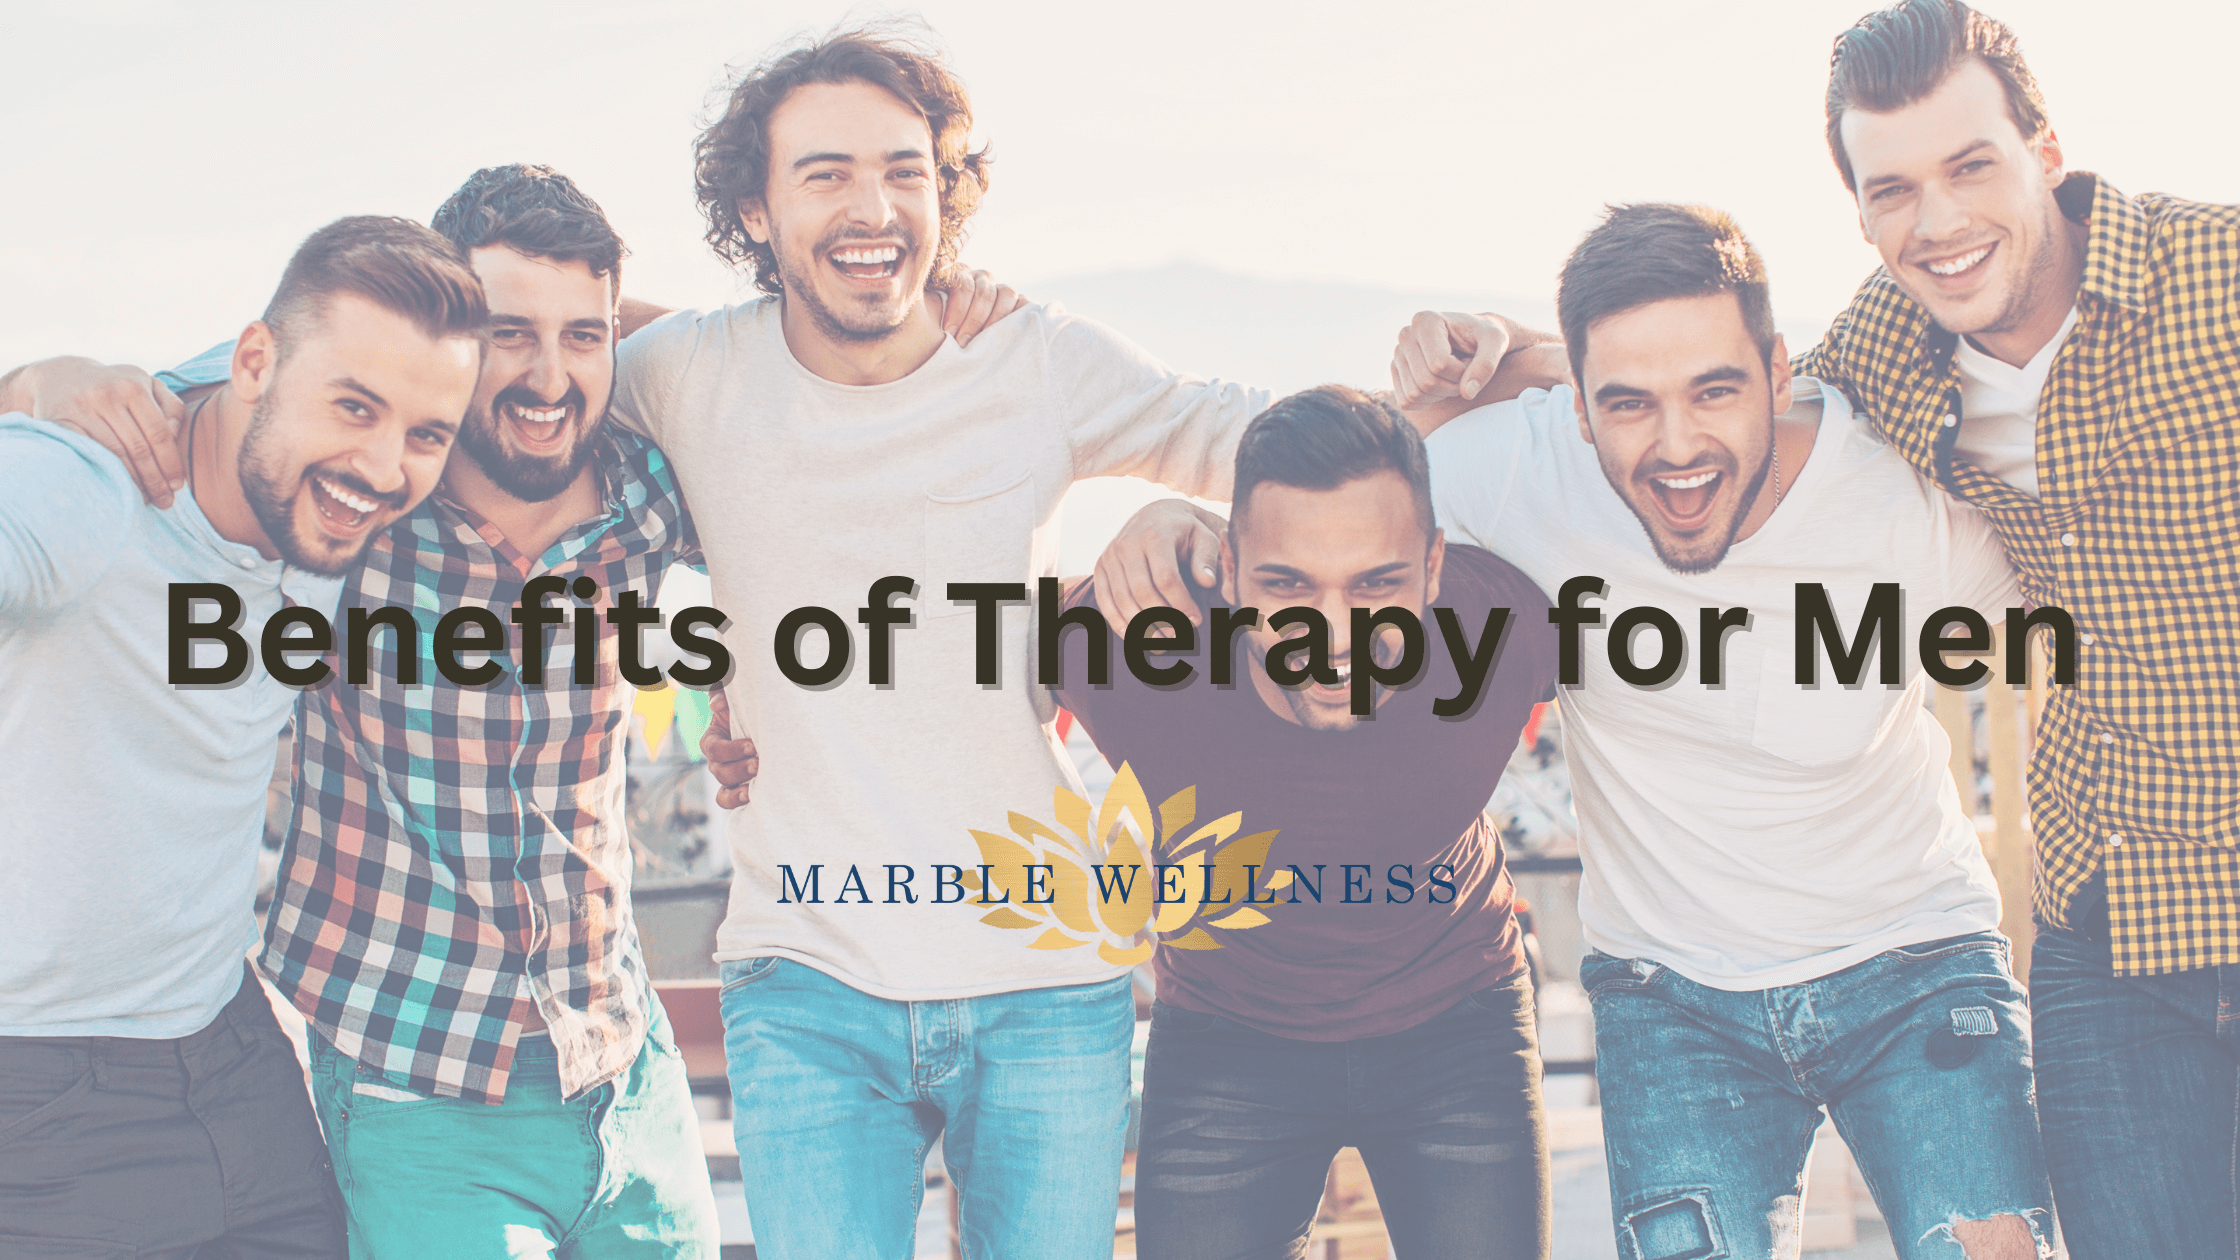 Cover for blog post "Benefits of Therapy for Men". Marble Wellness is located in West County, MO 63011 and specializes in therapy for men and much more.